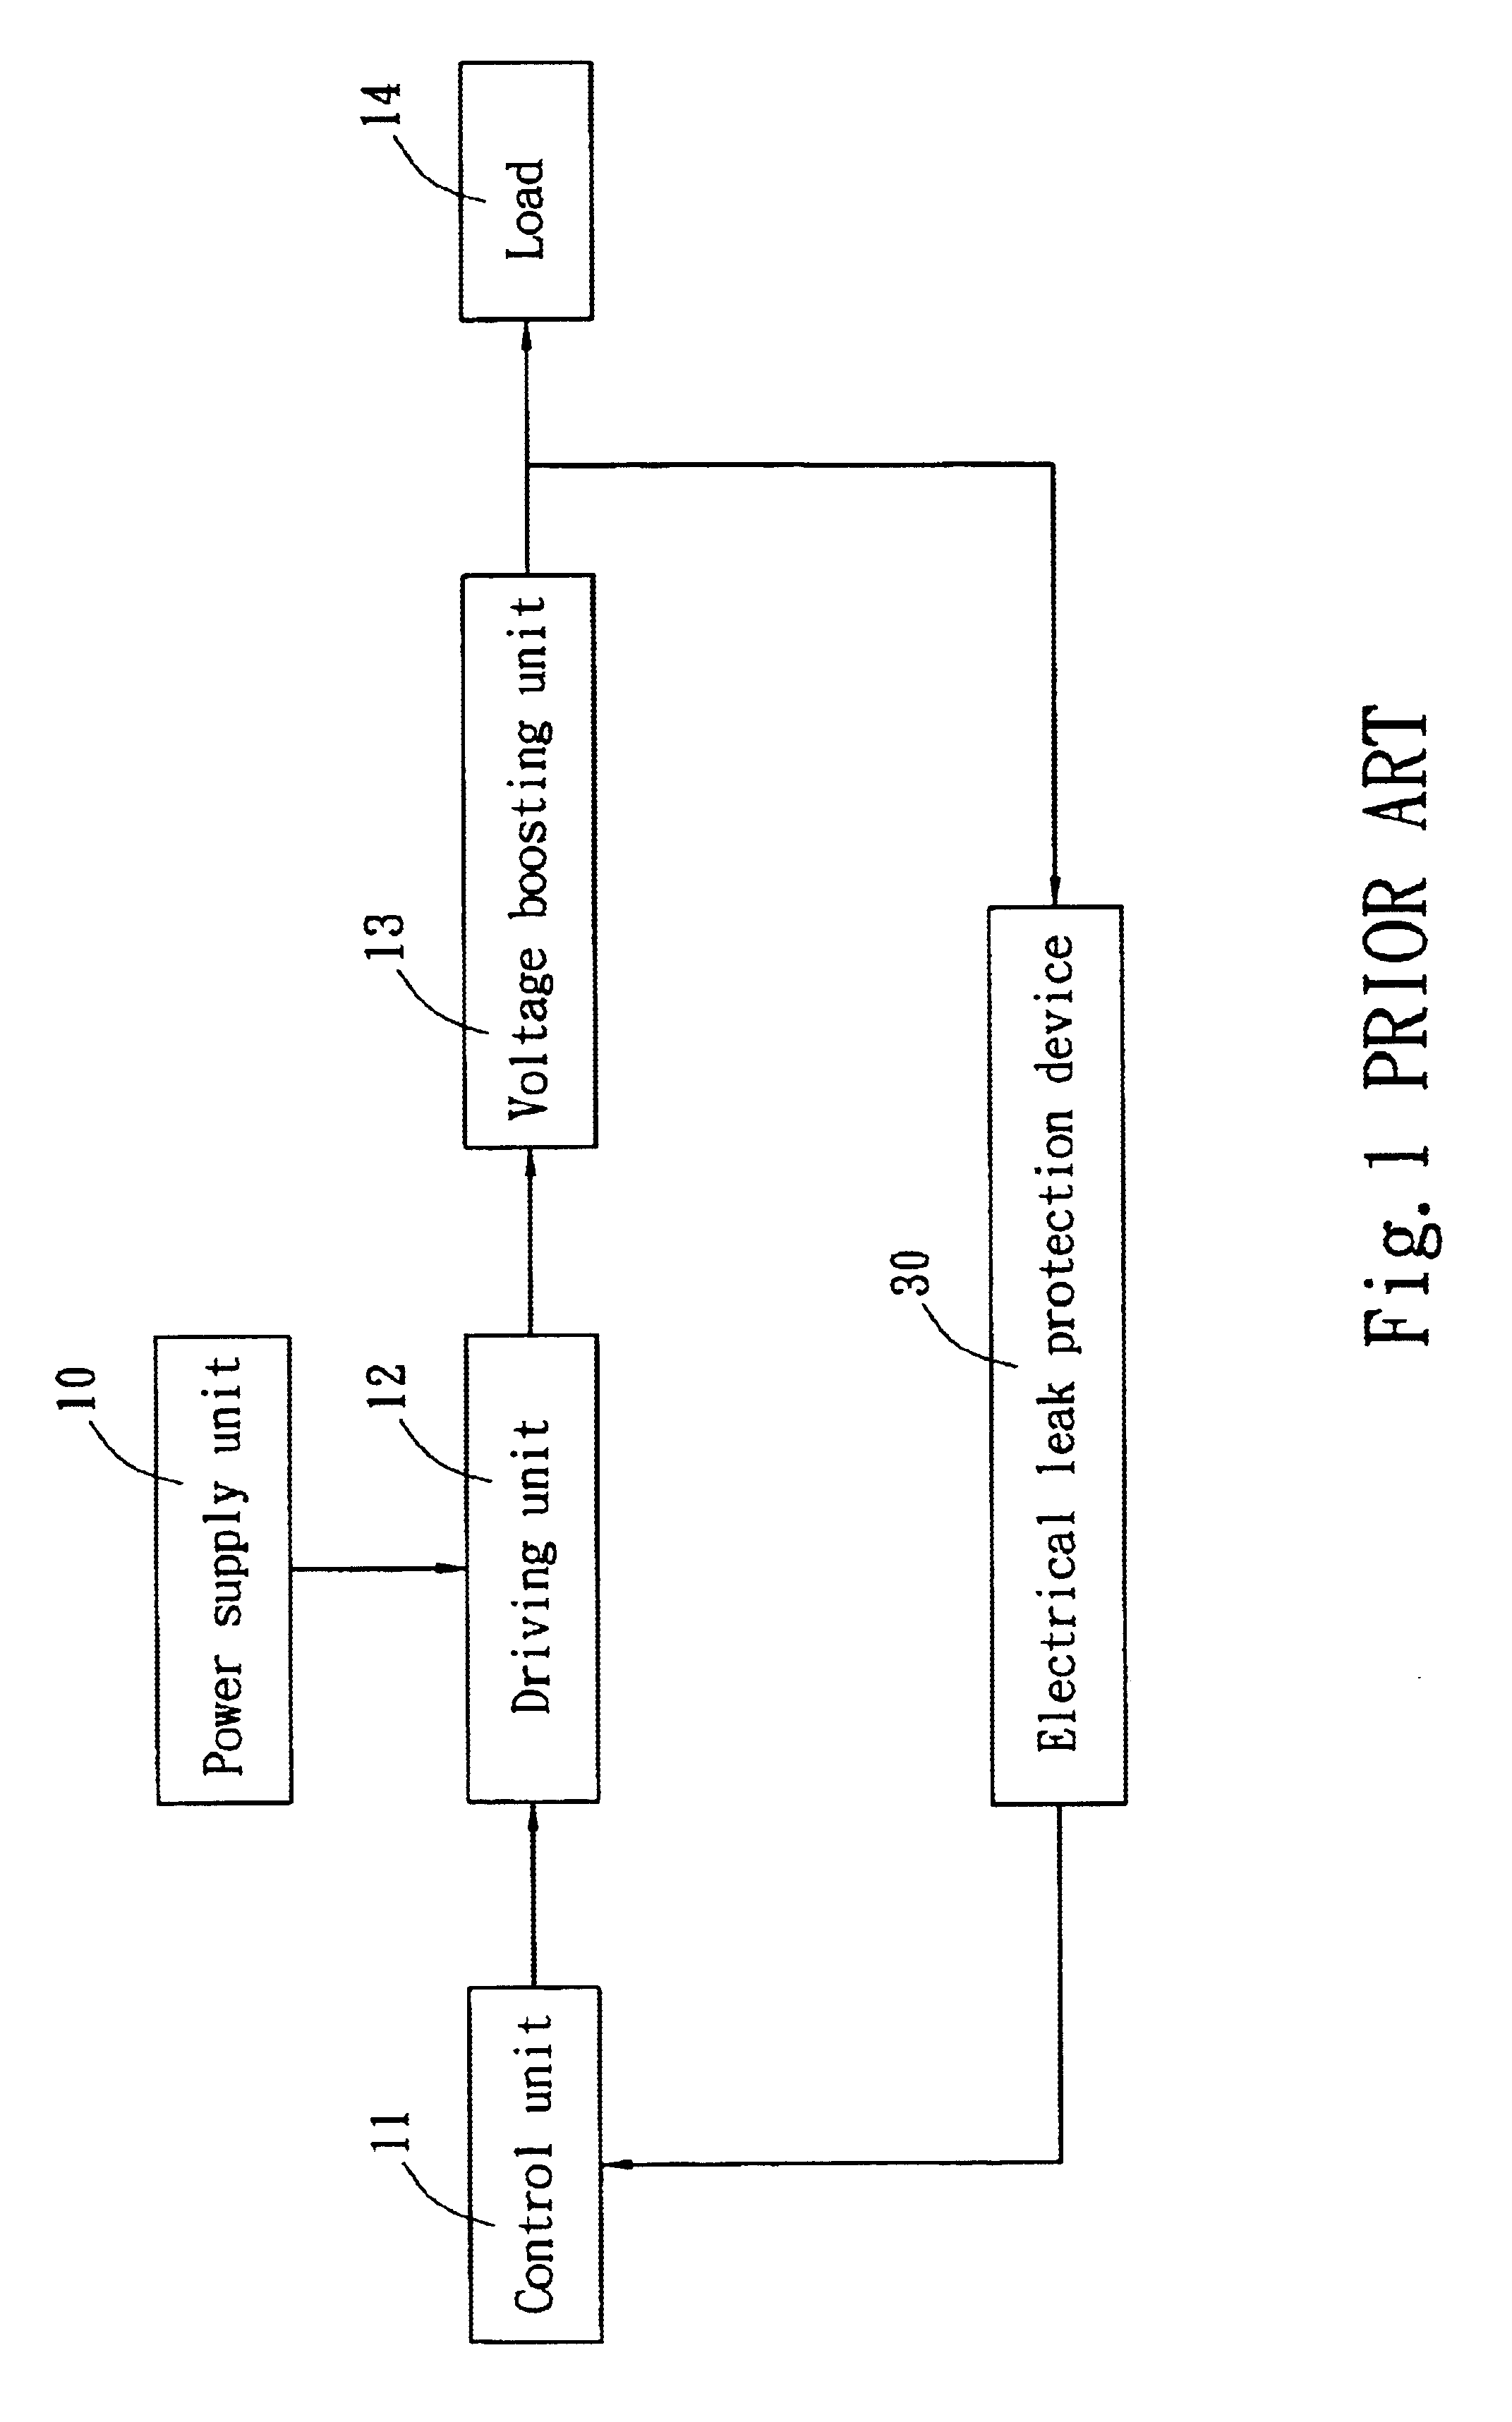 ARC discharge protection apparatus